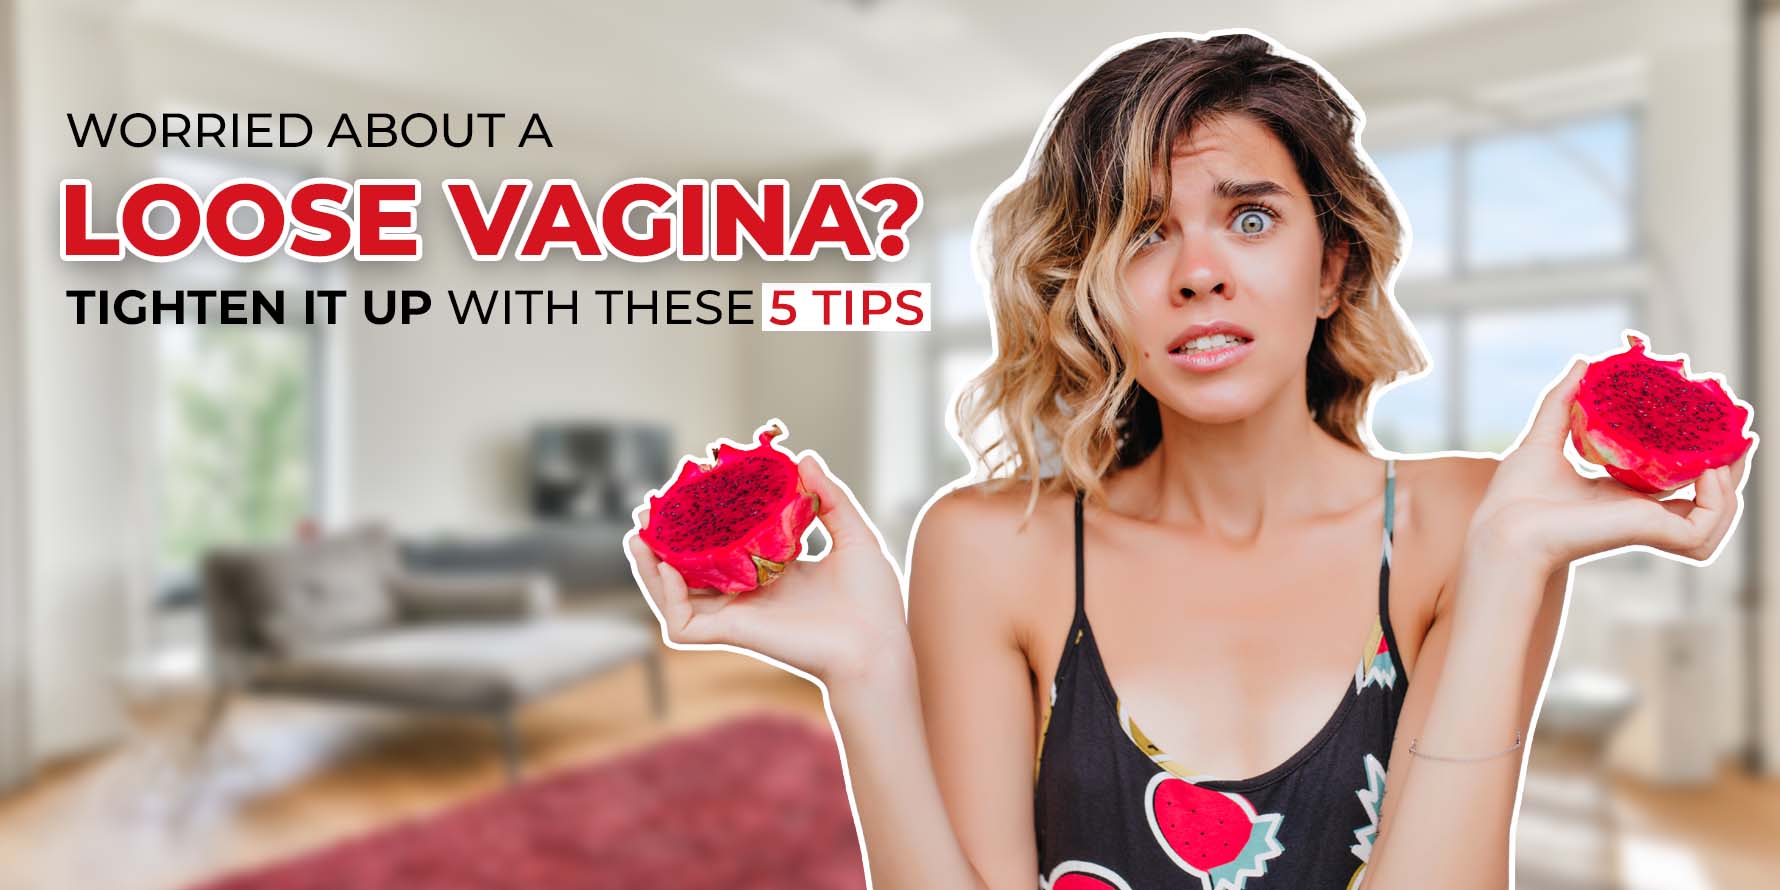 Worried about a loose vagina? Tighten it up with these 5 tips